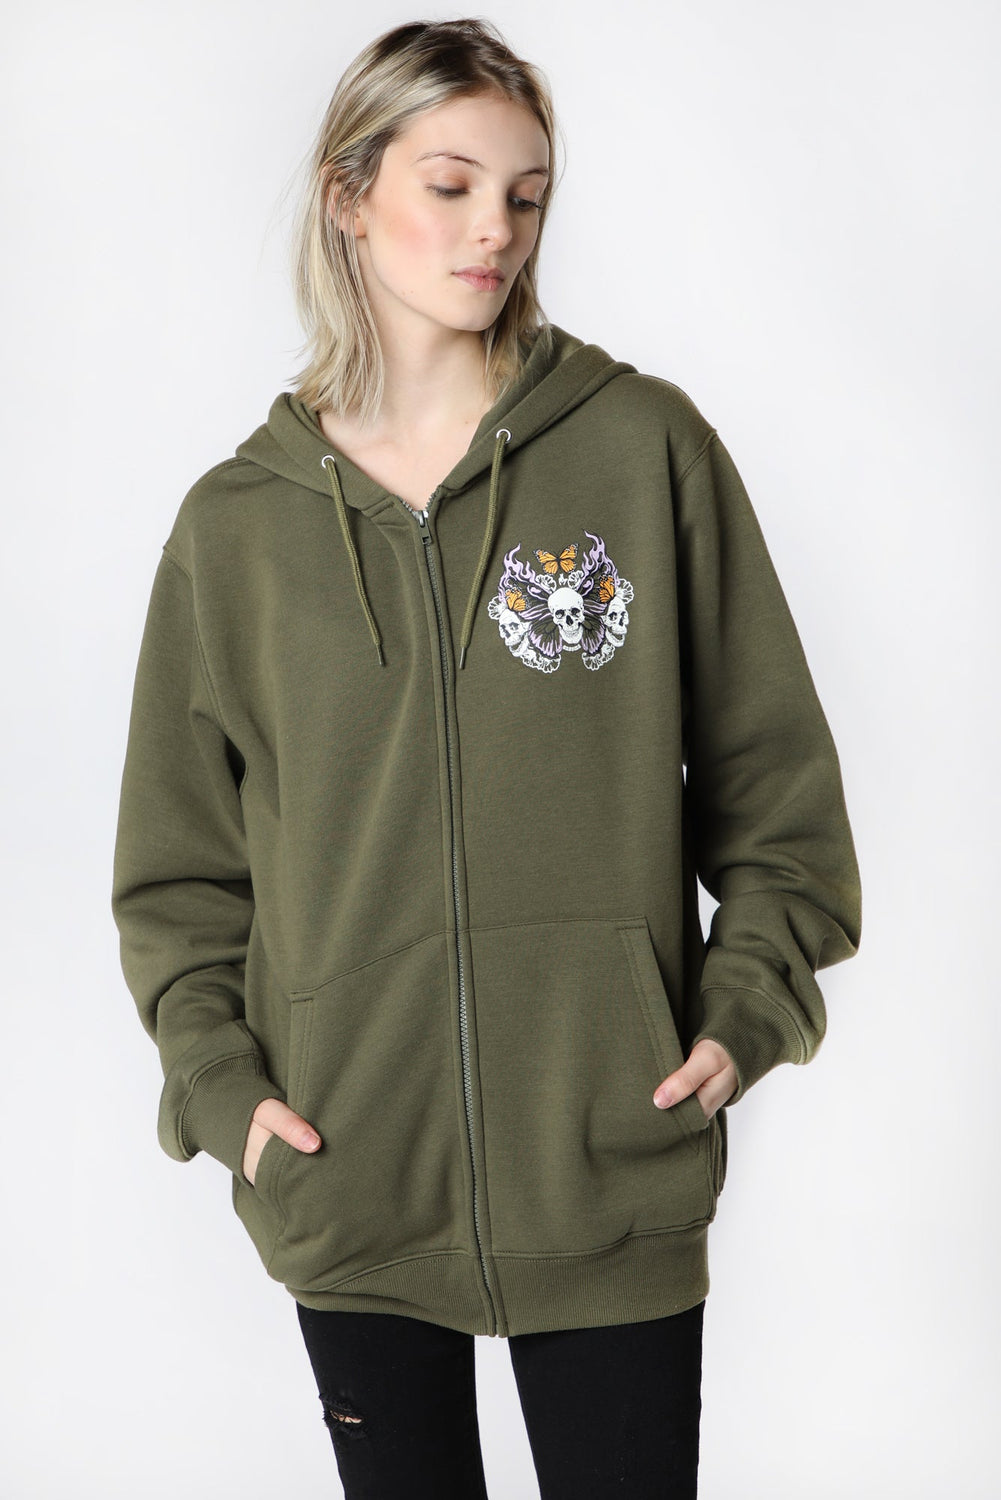 Womens Enygma Graphic Zip-Up Olive Green Hoodie Womens Enygma Graphic Zip-Up Olive Green Hoodie